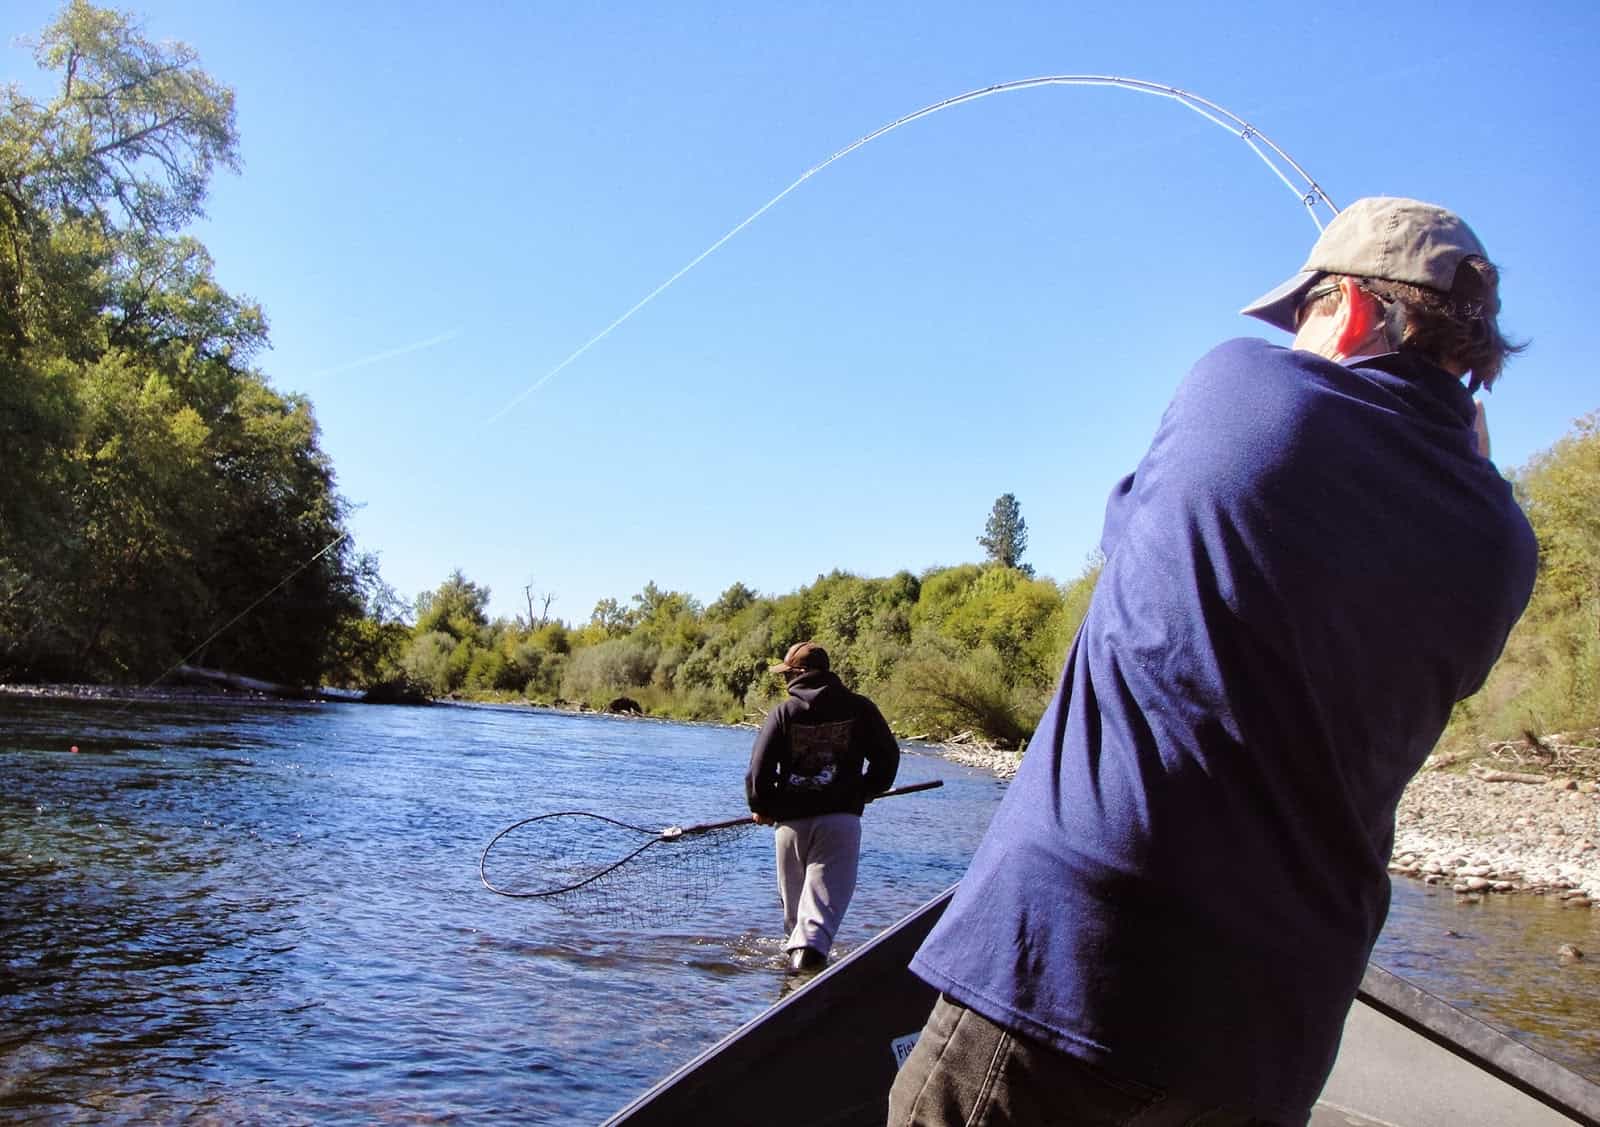 Angler hooked into a steelhead with bent rod with guide getting ready to net his catch.